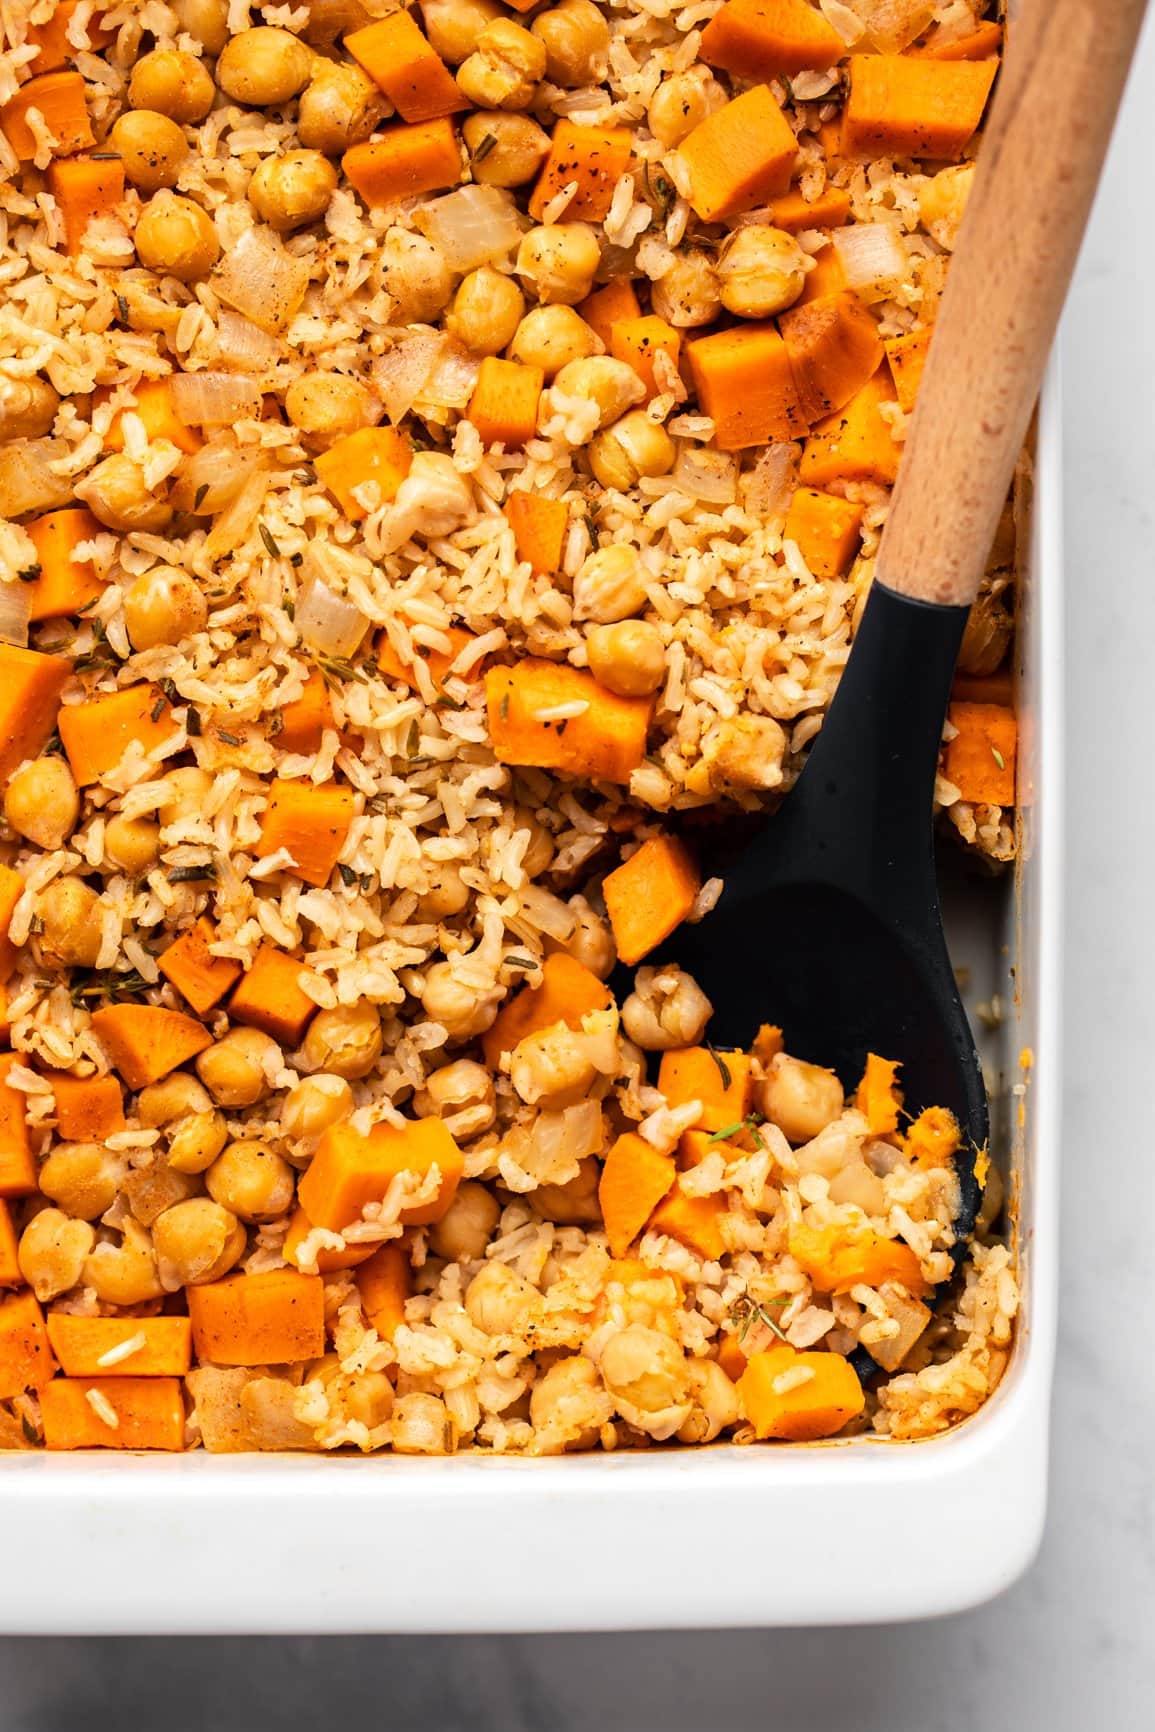 rosemary sweet potato casserole in white pan with wooden spoon scooping out casserole